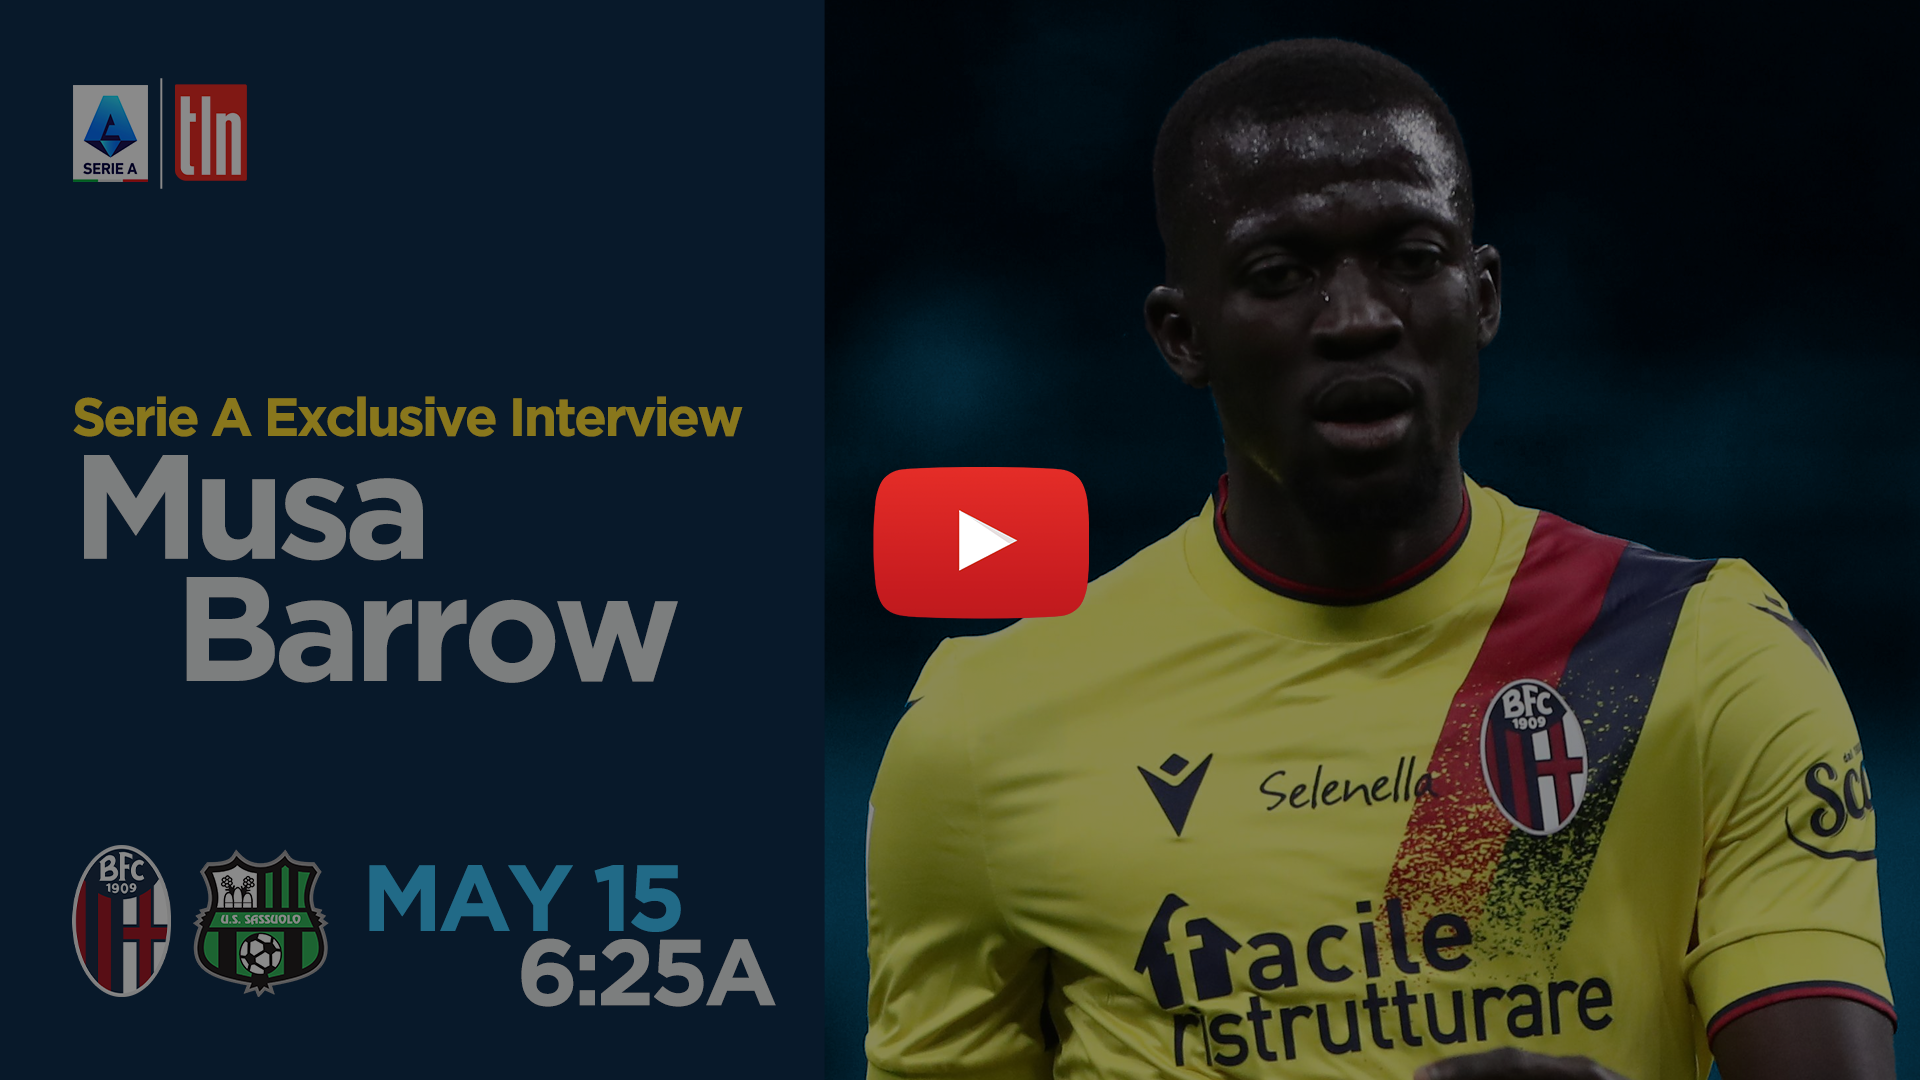 In this exclusive interview between Serie A and Musa Barrow, the attacker speaks about his career and previews Bologna vs Sassuolo, taking place on 15 May 2022.